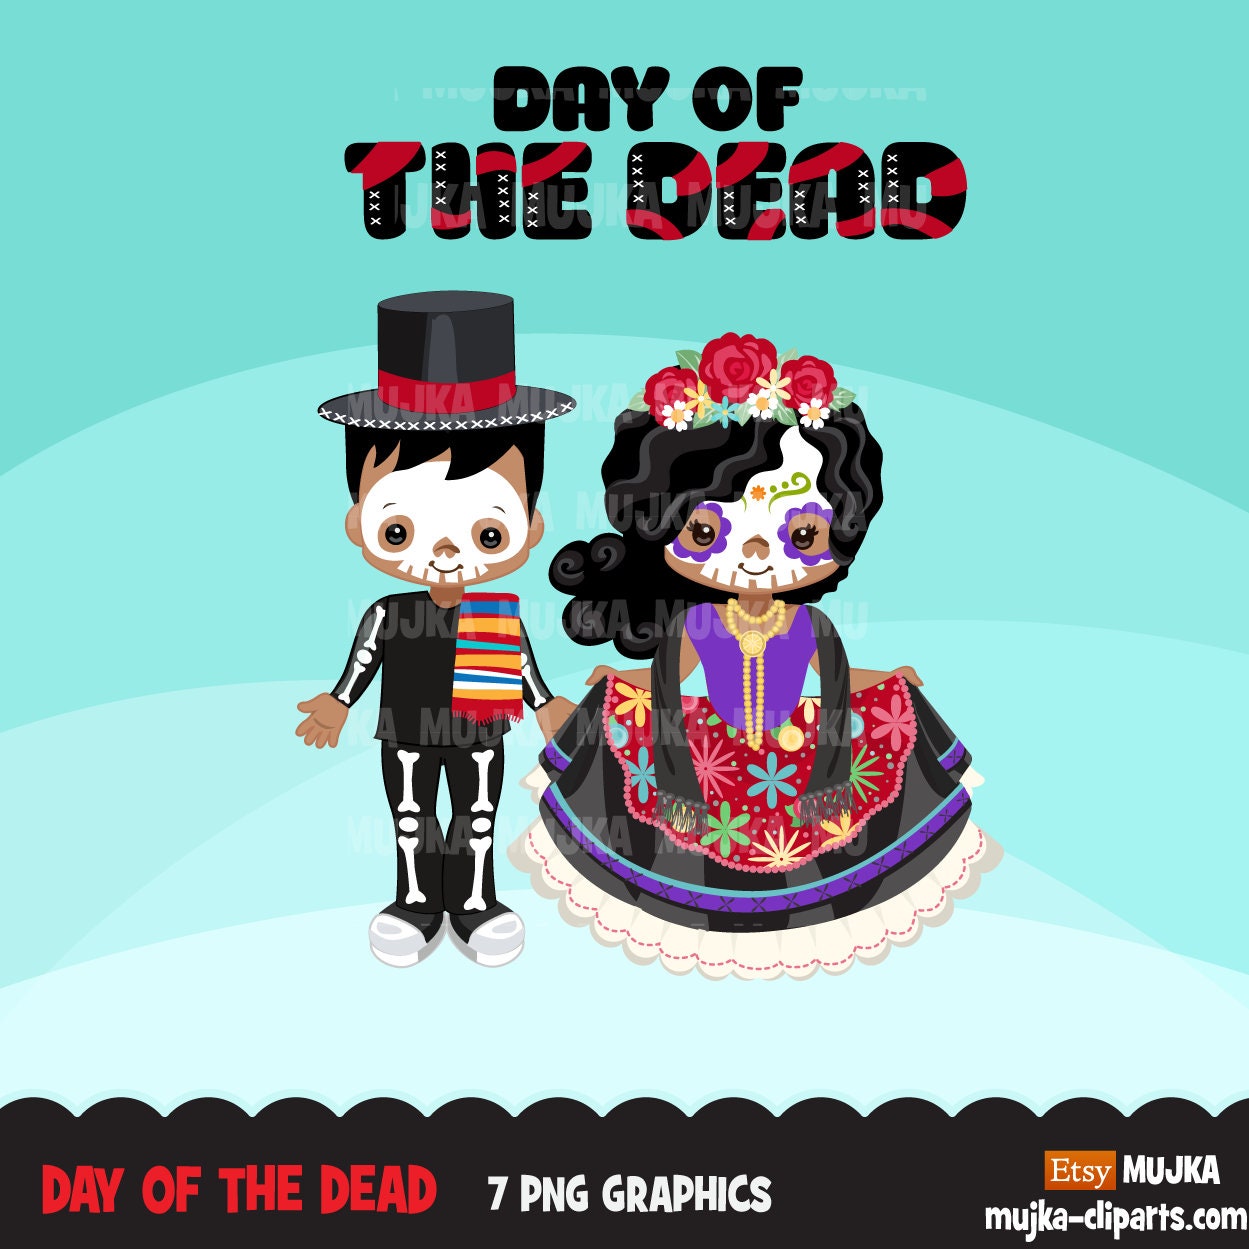 Day of the Dead PNG, Día De Los Muertos Clipart, Halloween graphics, Mexican holiday sublimation designs, sugar skull Png, boys and girls